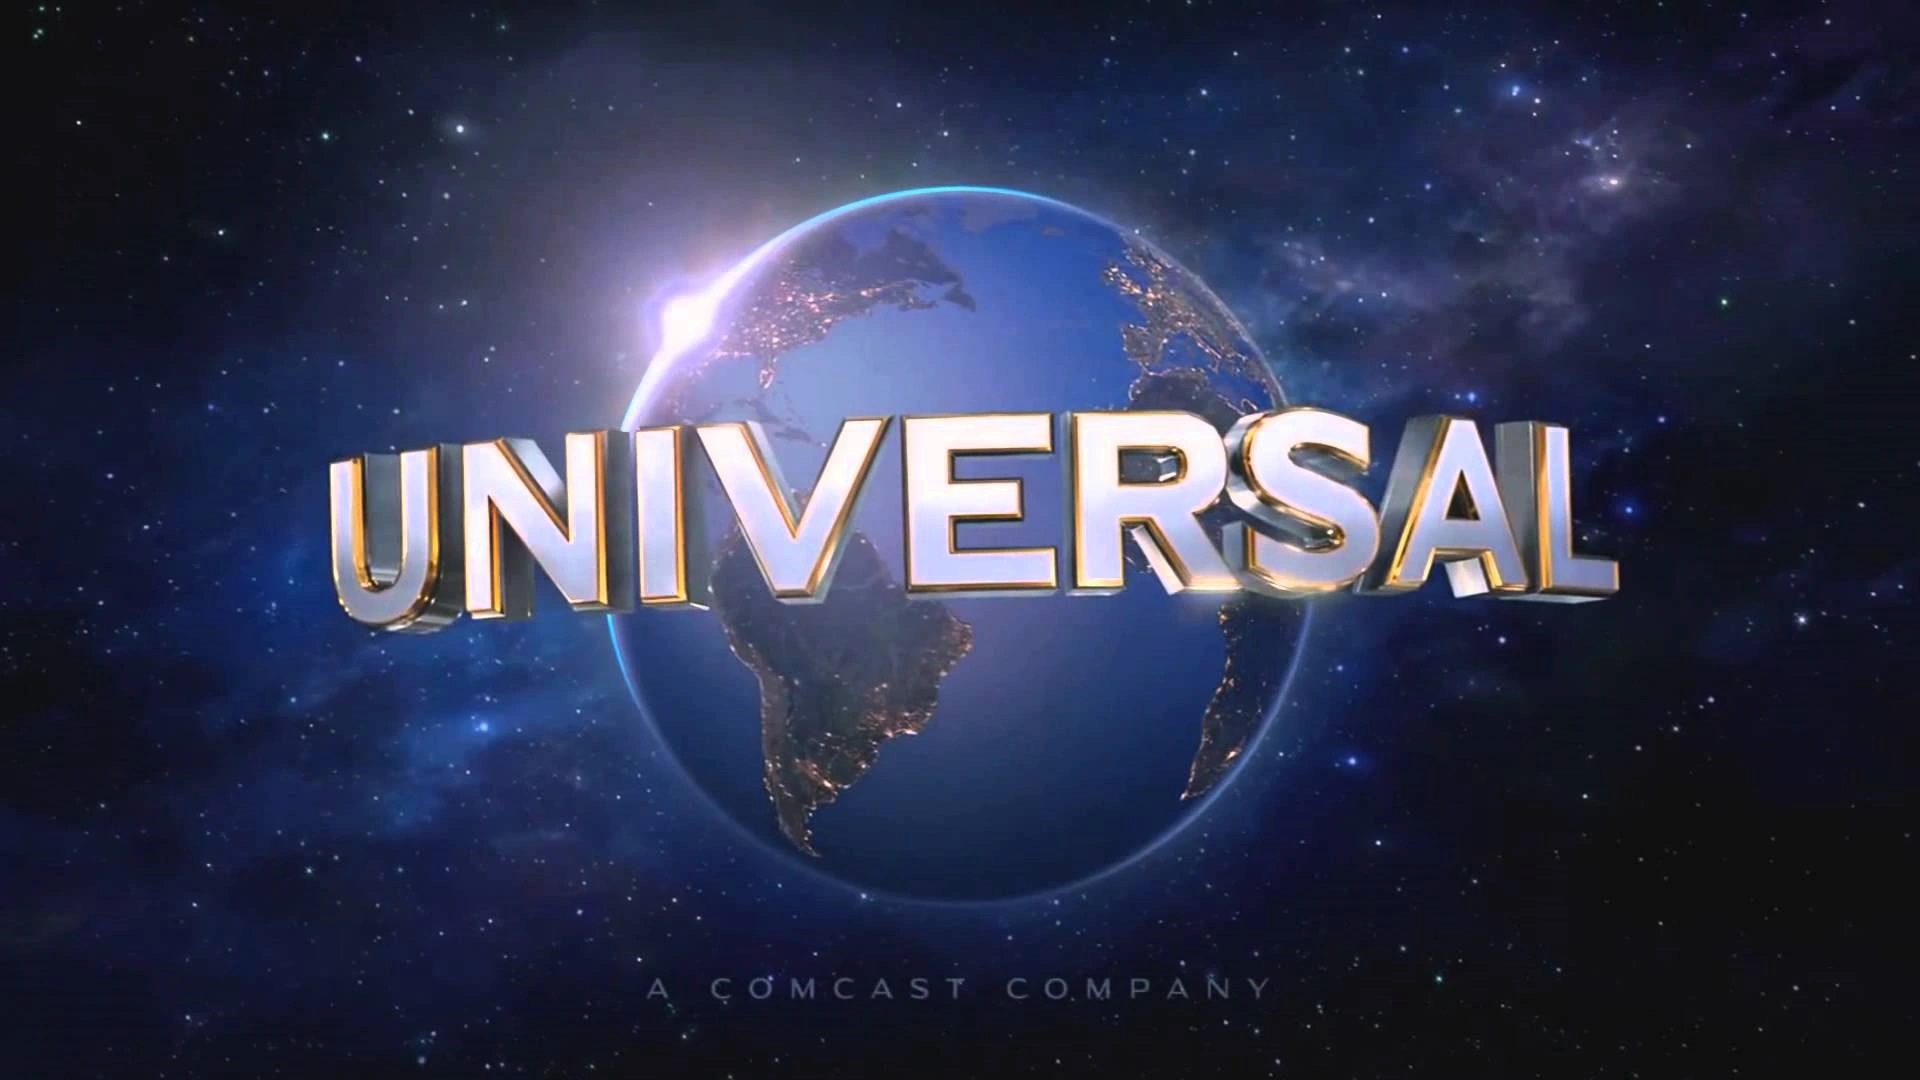 The End: Universal Pictures is finally leaving the Russian market and closing its office